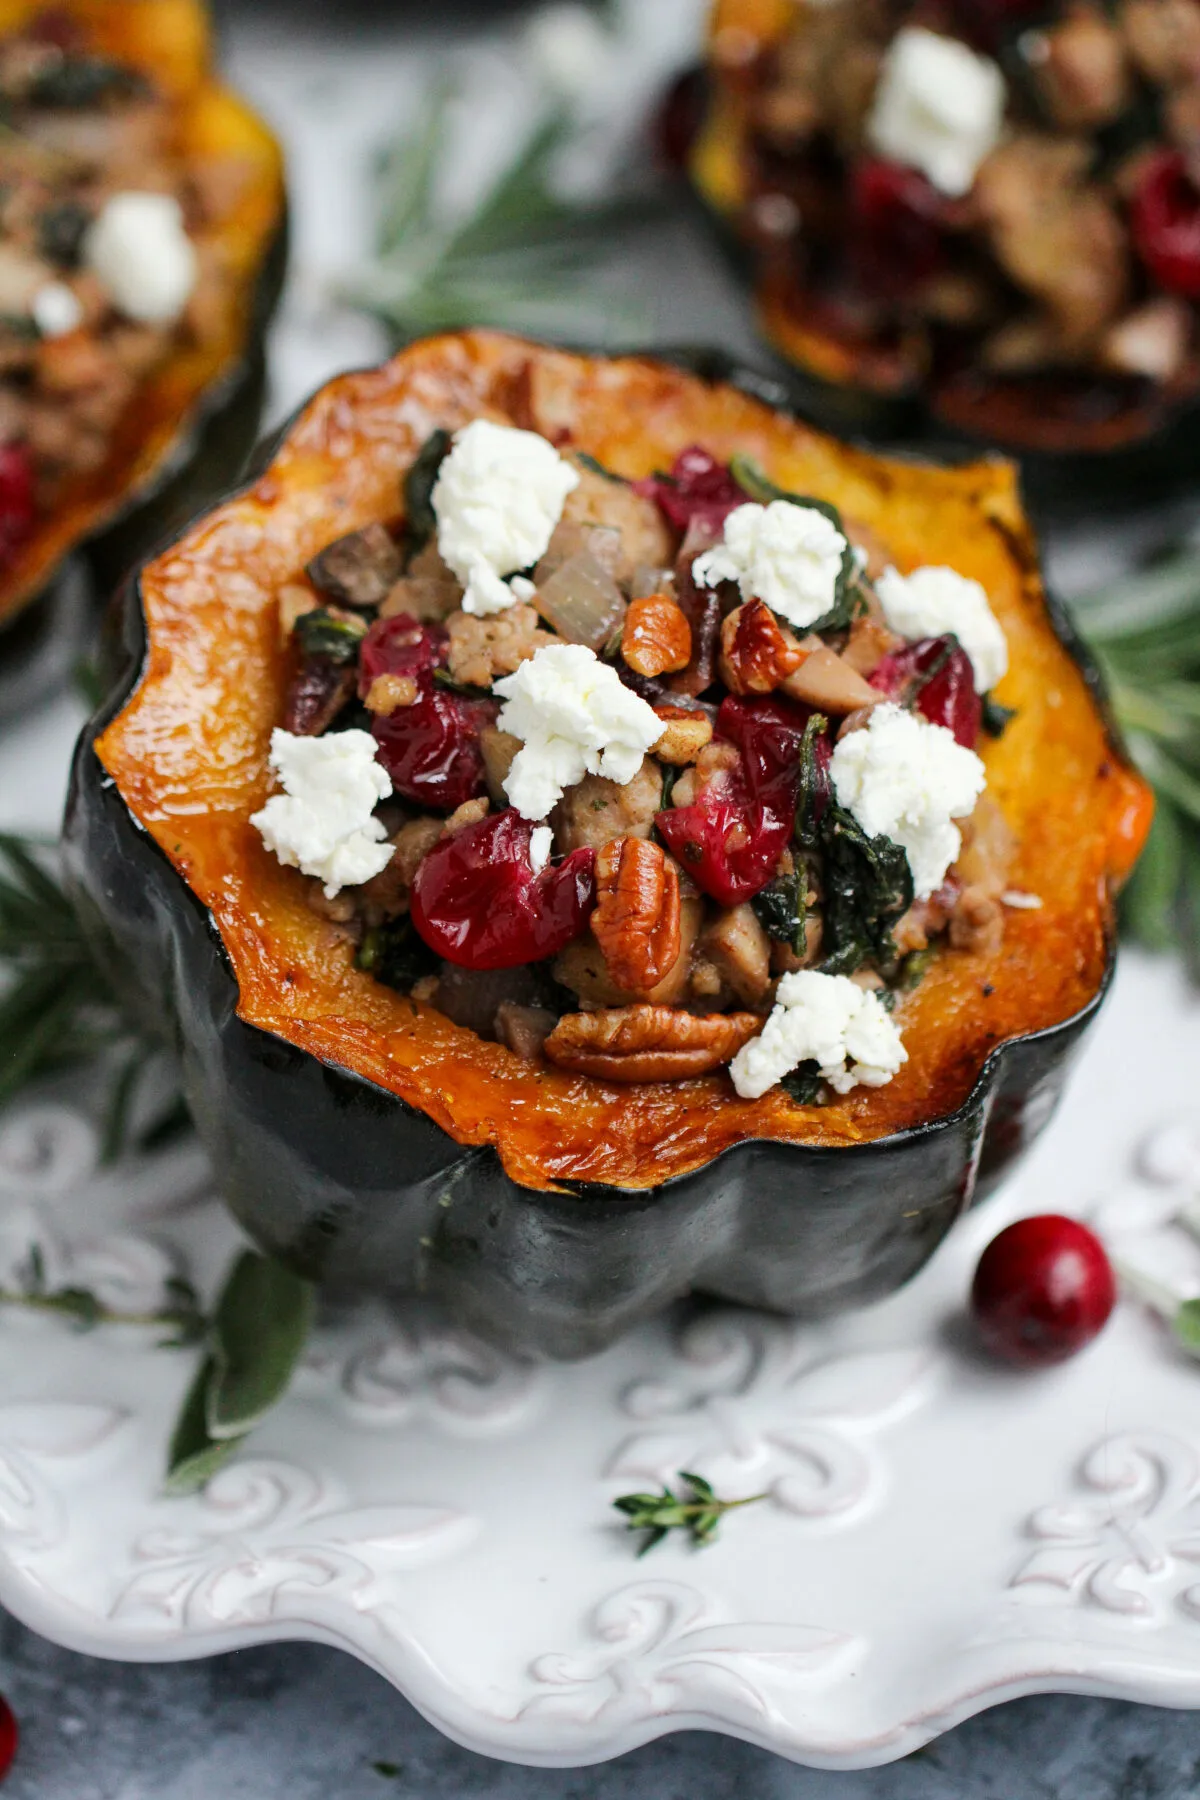 Make the perfect fall or winter dish with this simple, savoury sausage stuffed acorn squash recipe. It's delicious and comforting!